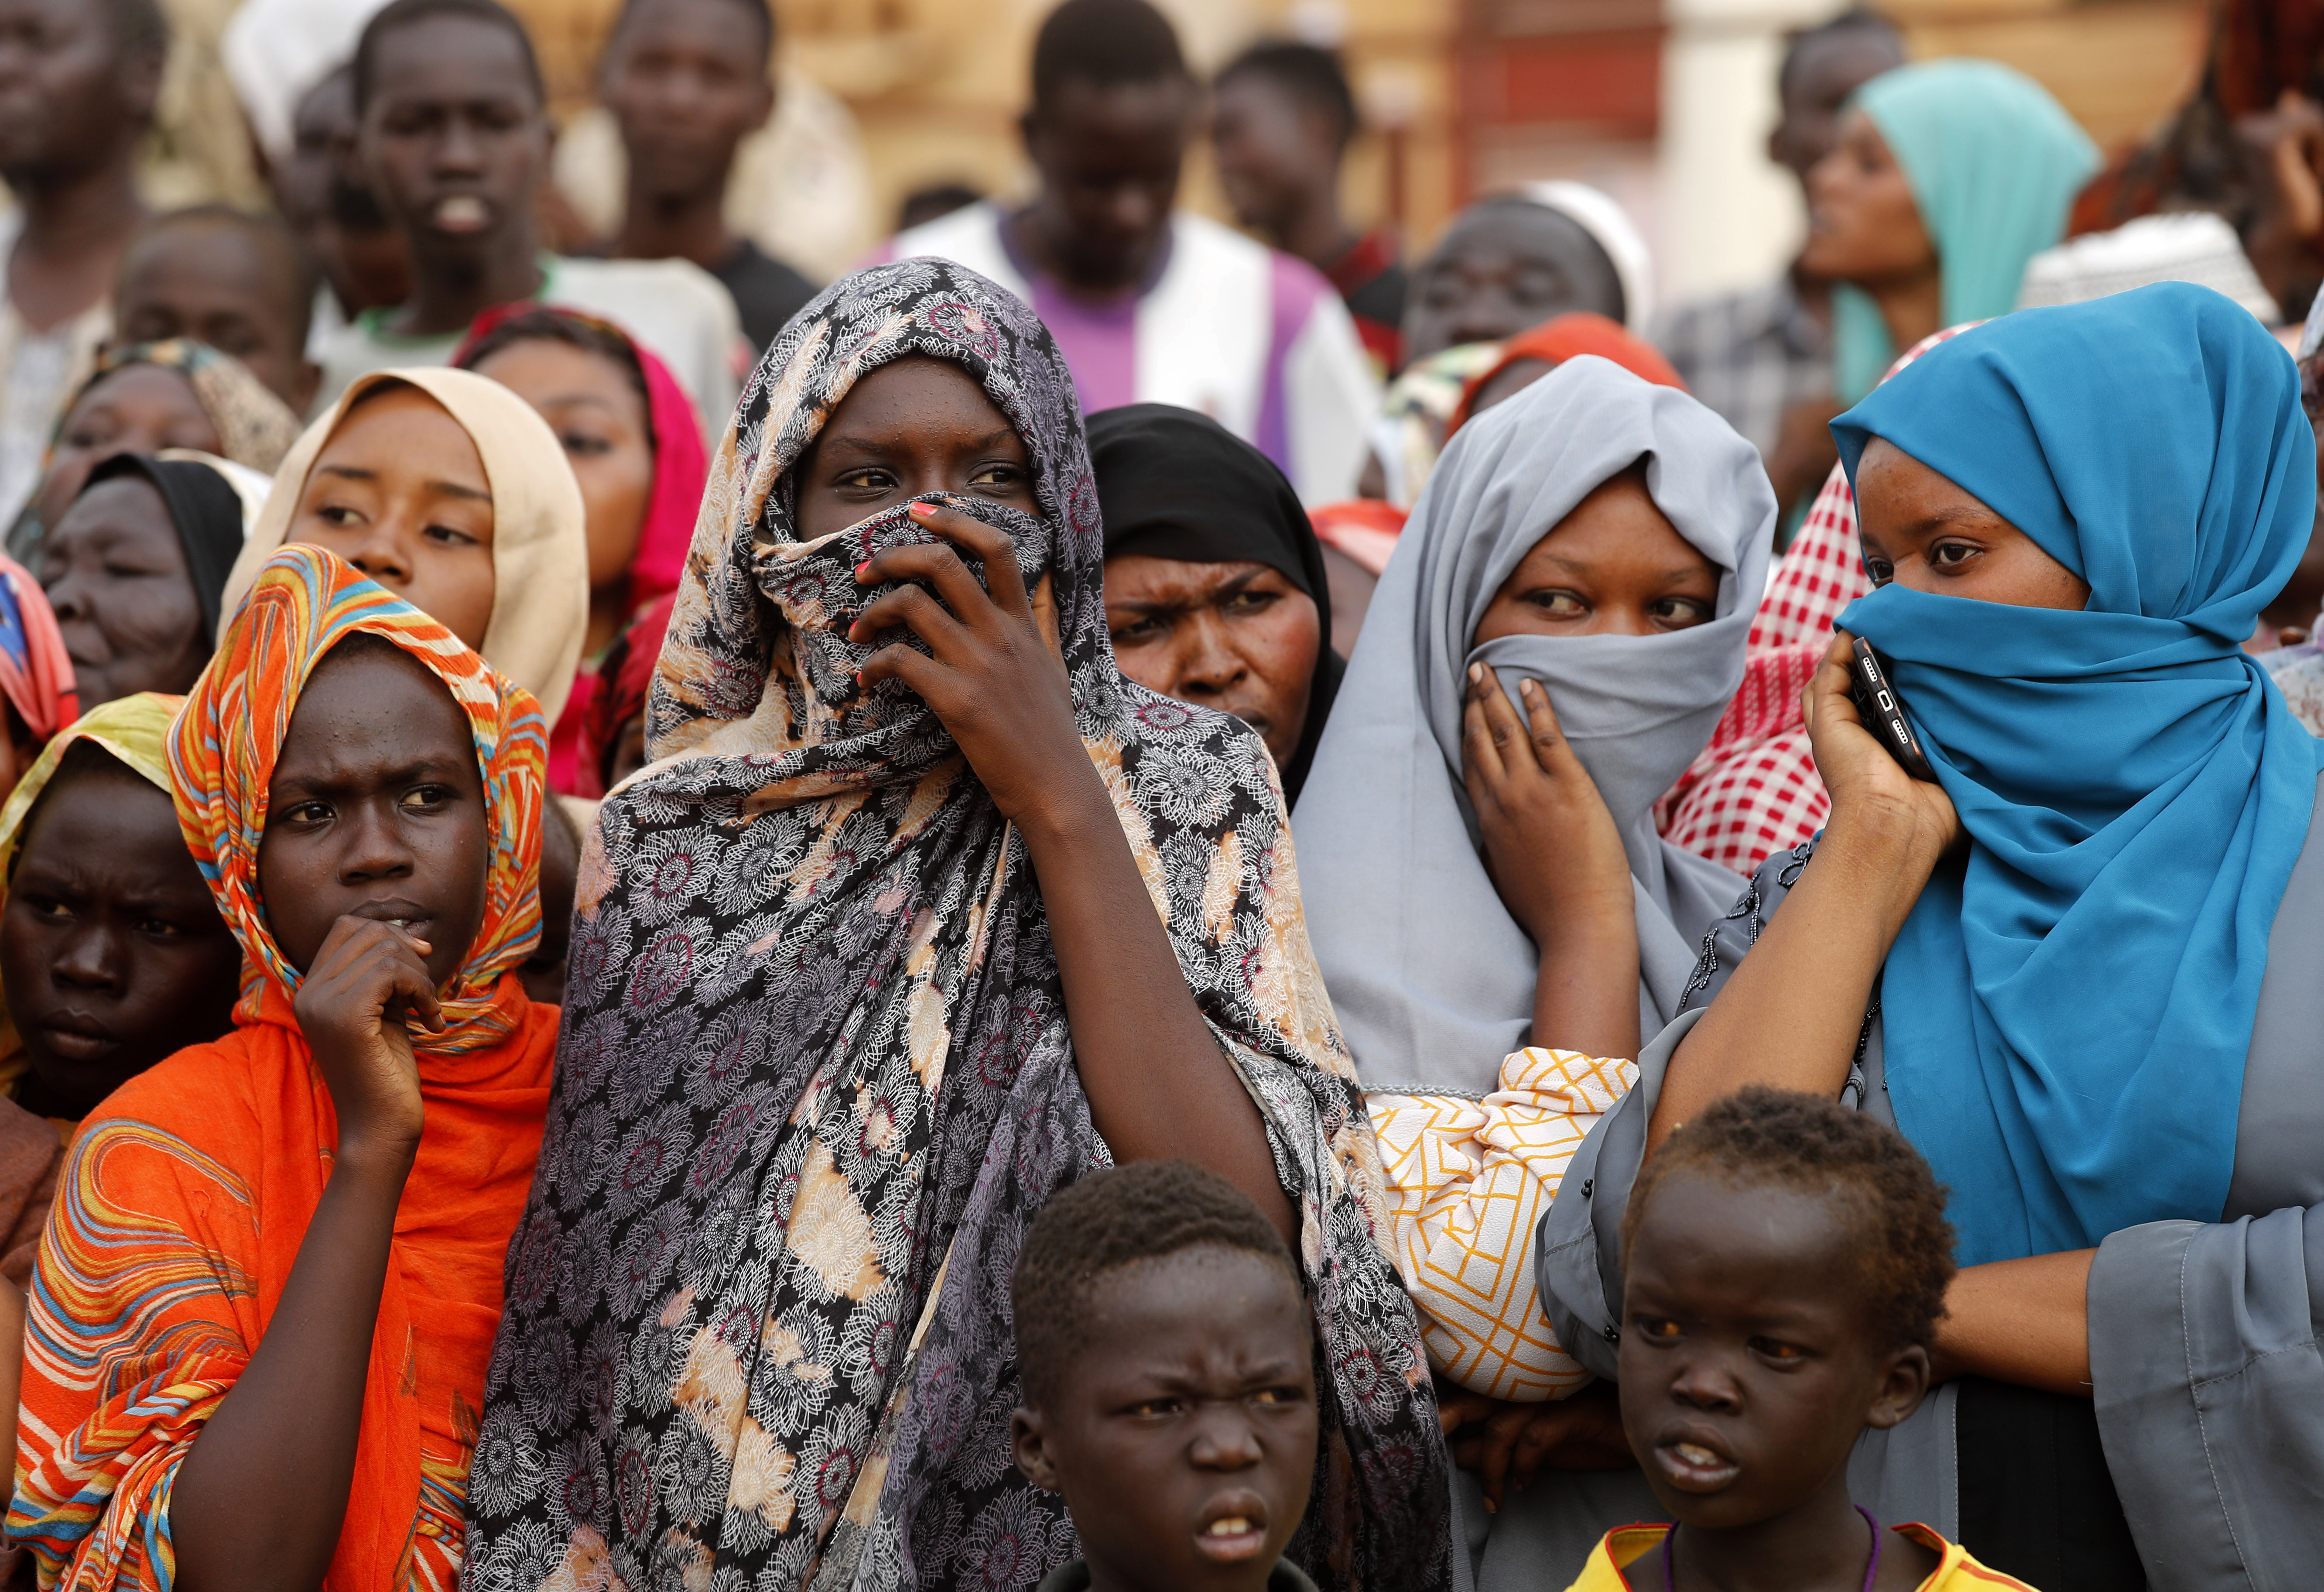 Sudanese women supporters of Gen. Abdel-Fattah Burhan, head of the military council, attend a military-backed rally, in Omdurman district, west of Khartoum, Sudan, Saturday, June 29, 2019. Sudan's ruling military council on Saturday warned protest leaders of 